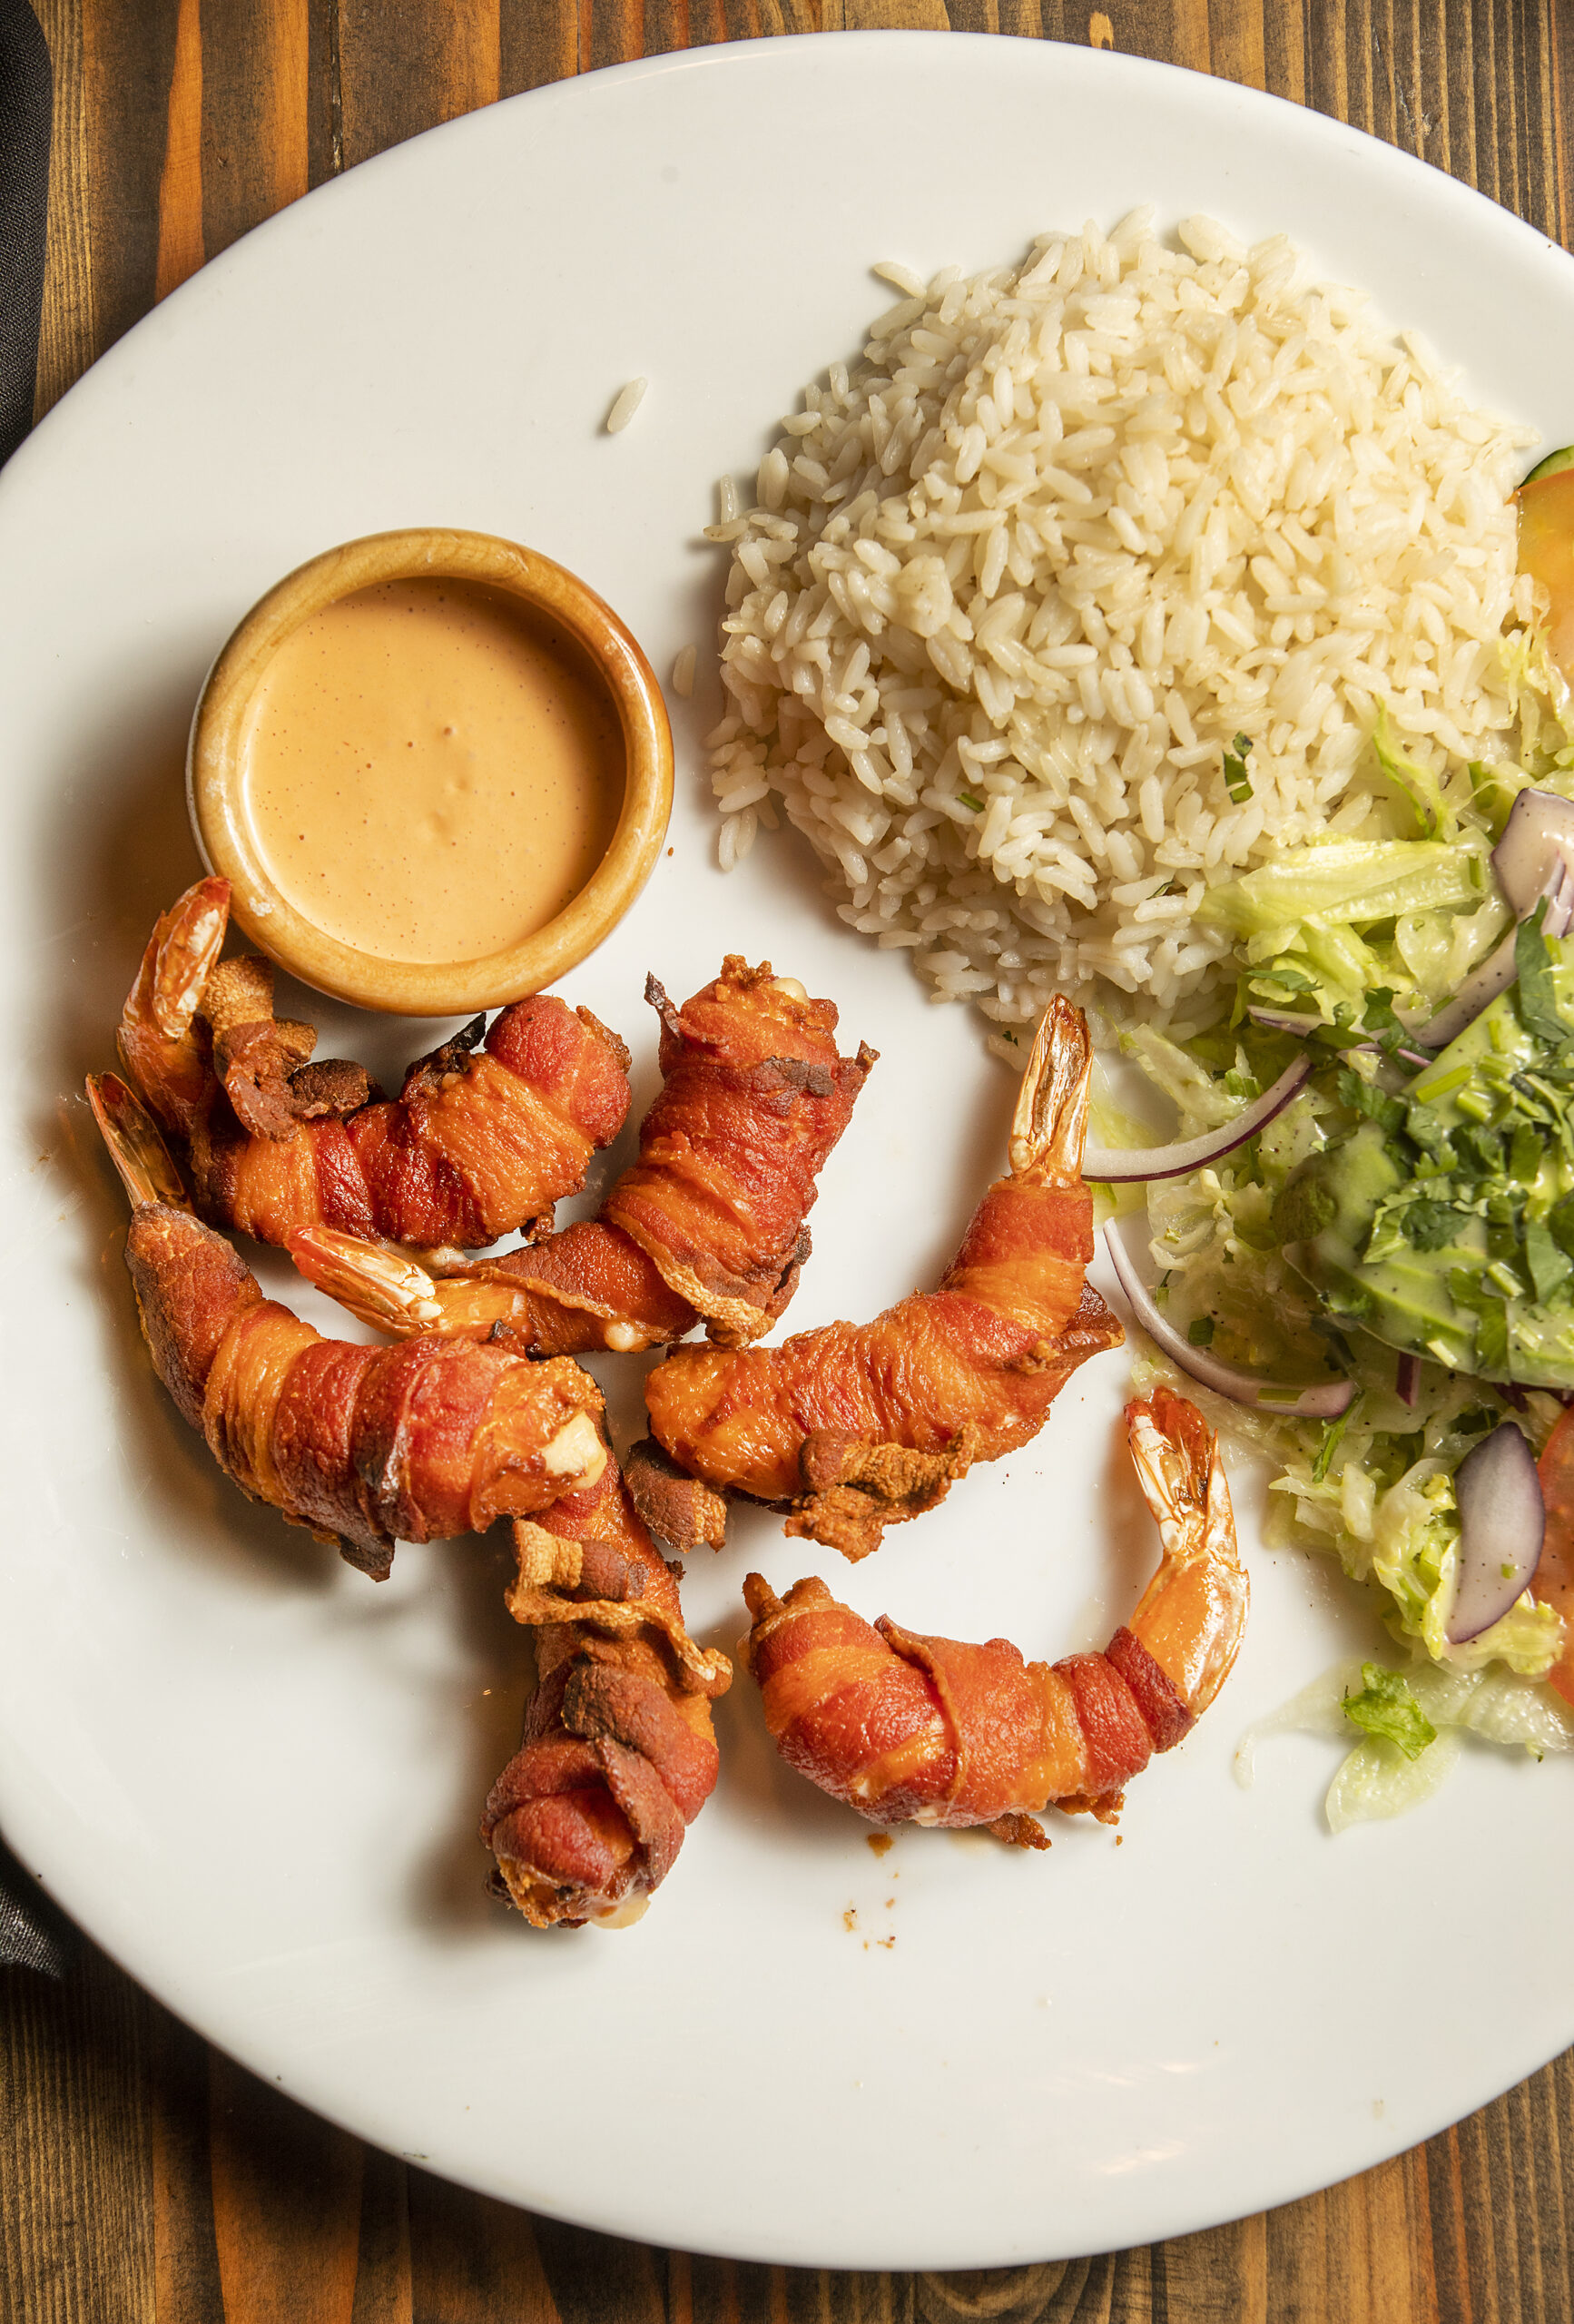 Camarones a la Momia are shrimp wrapped like a mummy in bacon from Pezcow in Windsor on Friday, April 1, 2022. (John Burgess/The Press Democrat)